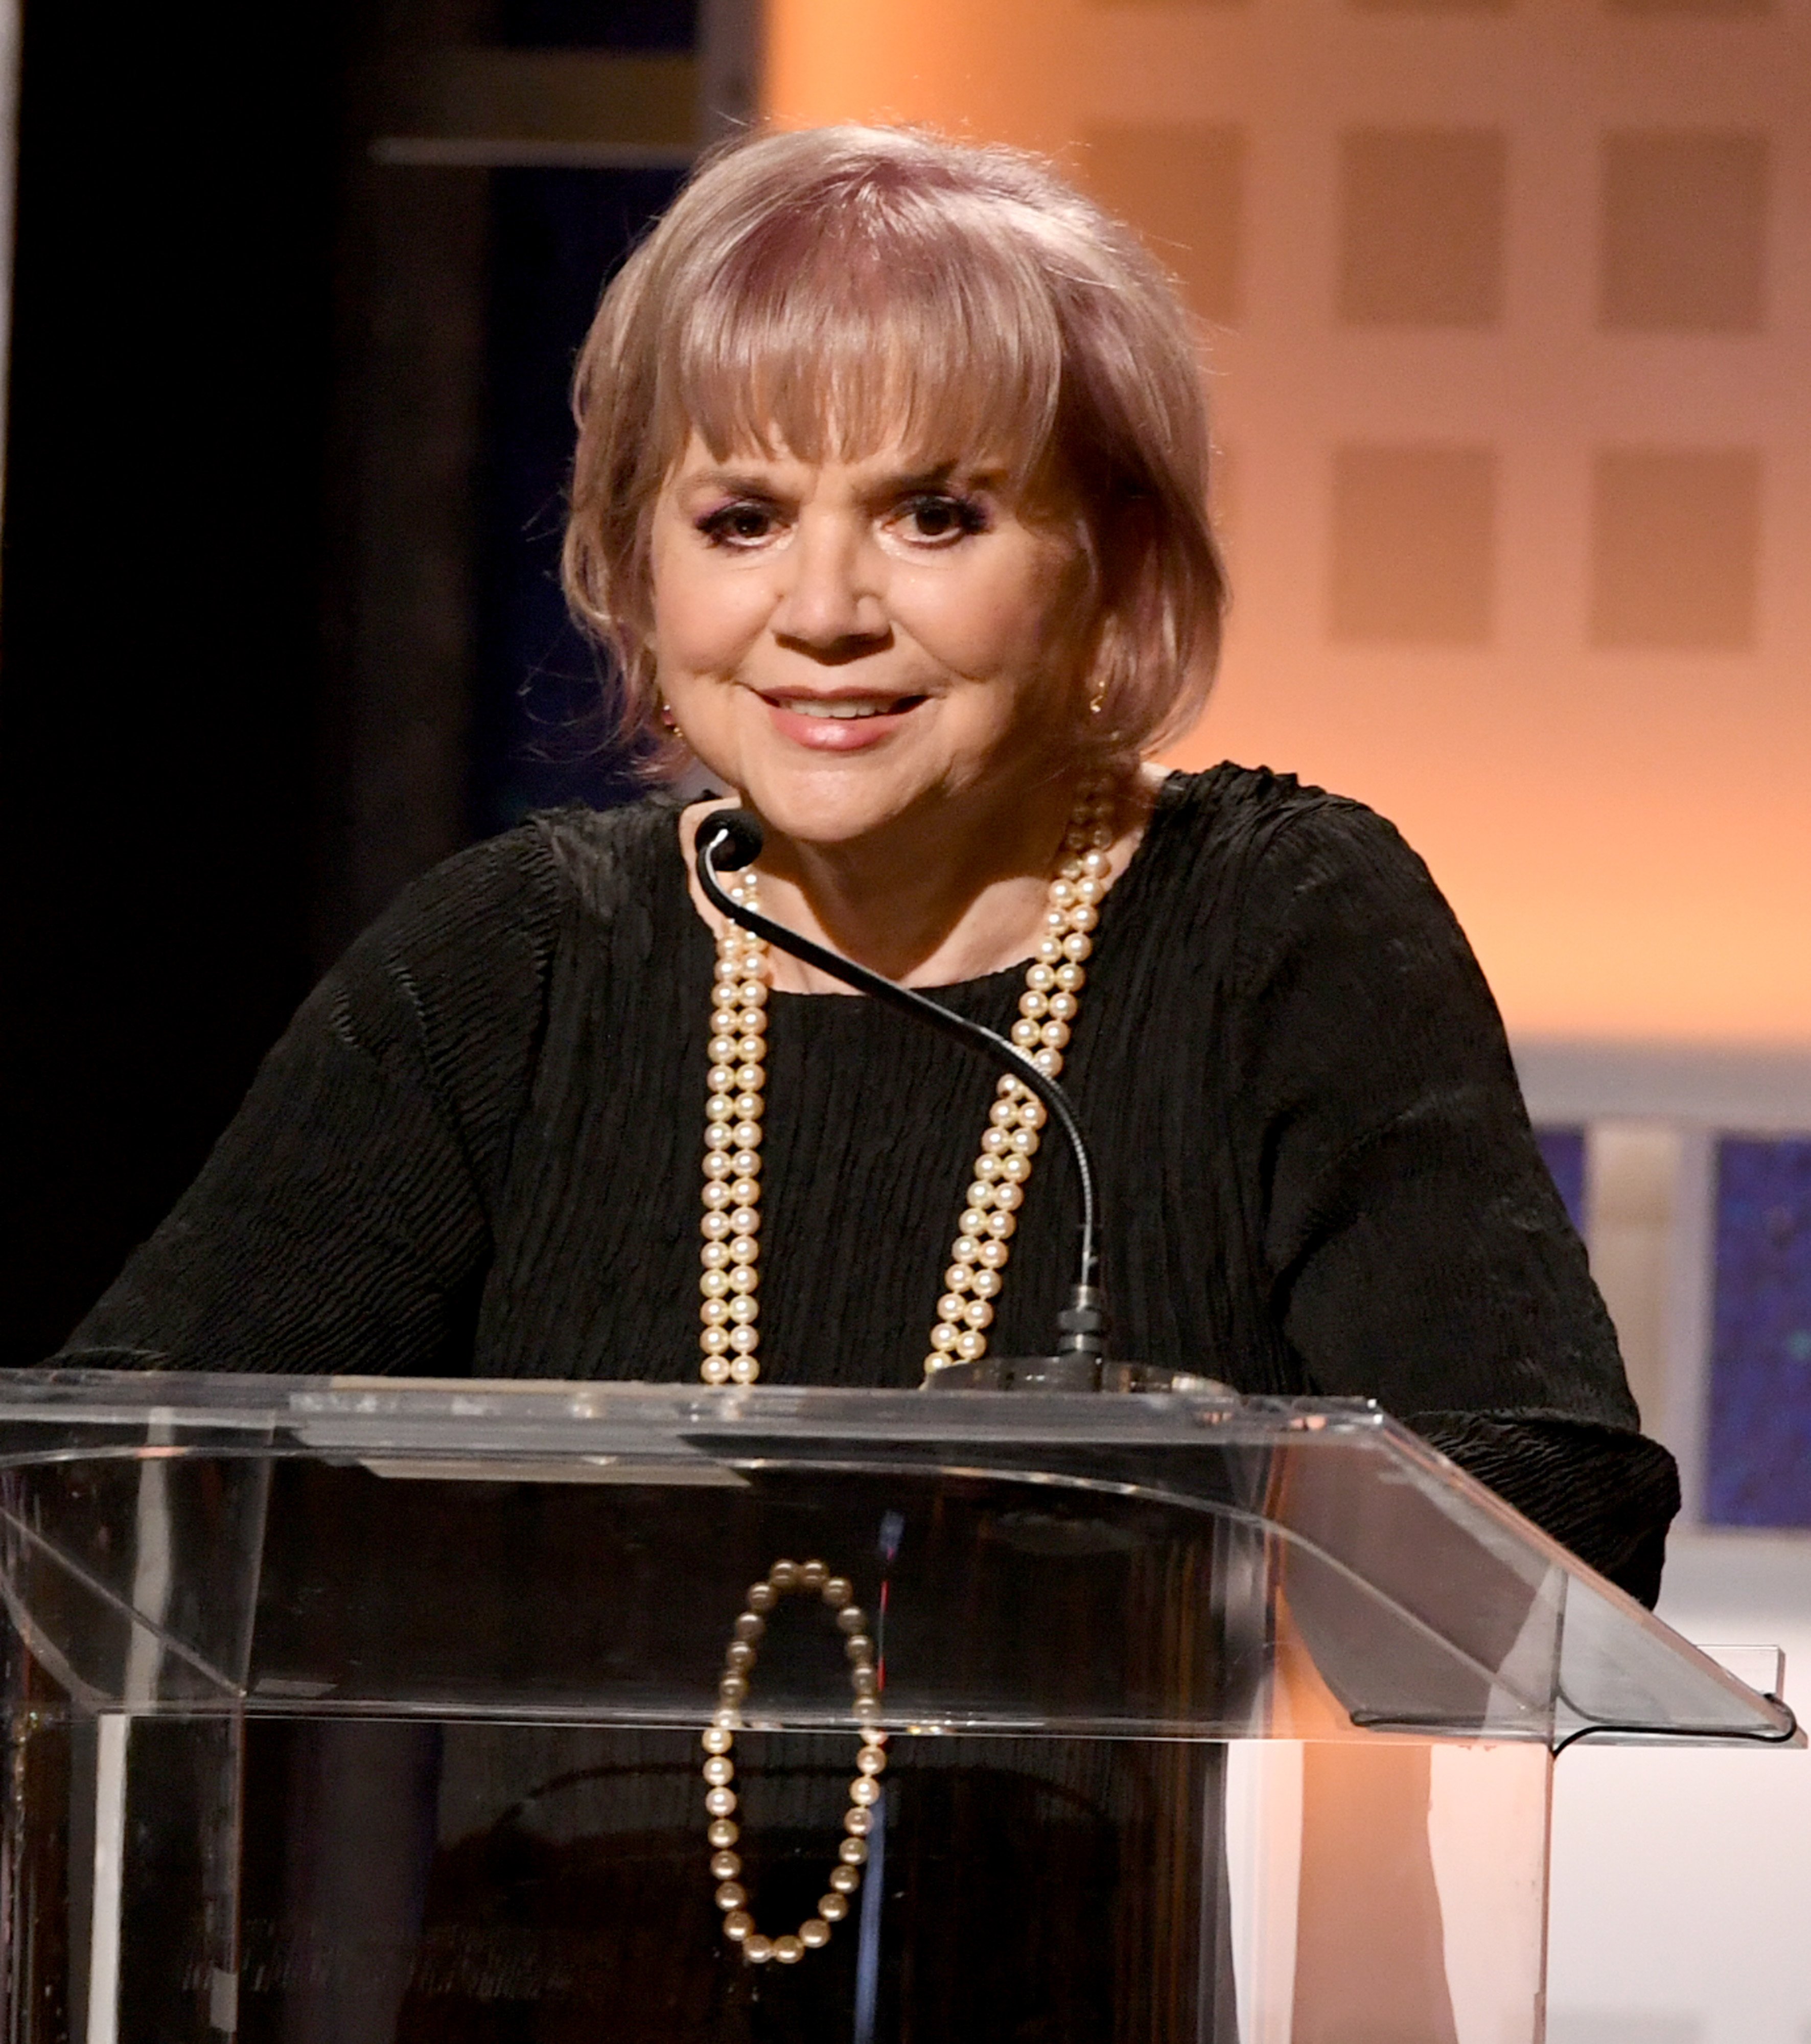 Linda Ronstadt accepts the Best Documentary award for "Linda Ronstadt: The Sound of My Voice" during AARP The Magazine's 19th Annual Movies For Grownups Awards on January 11, 2020, in Beverly Hills, California | Source: Getty Images